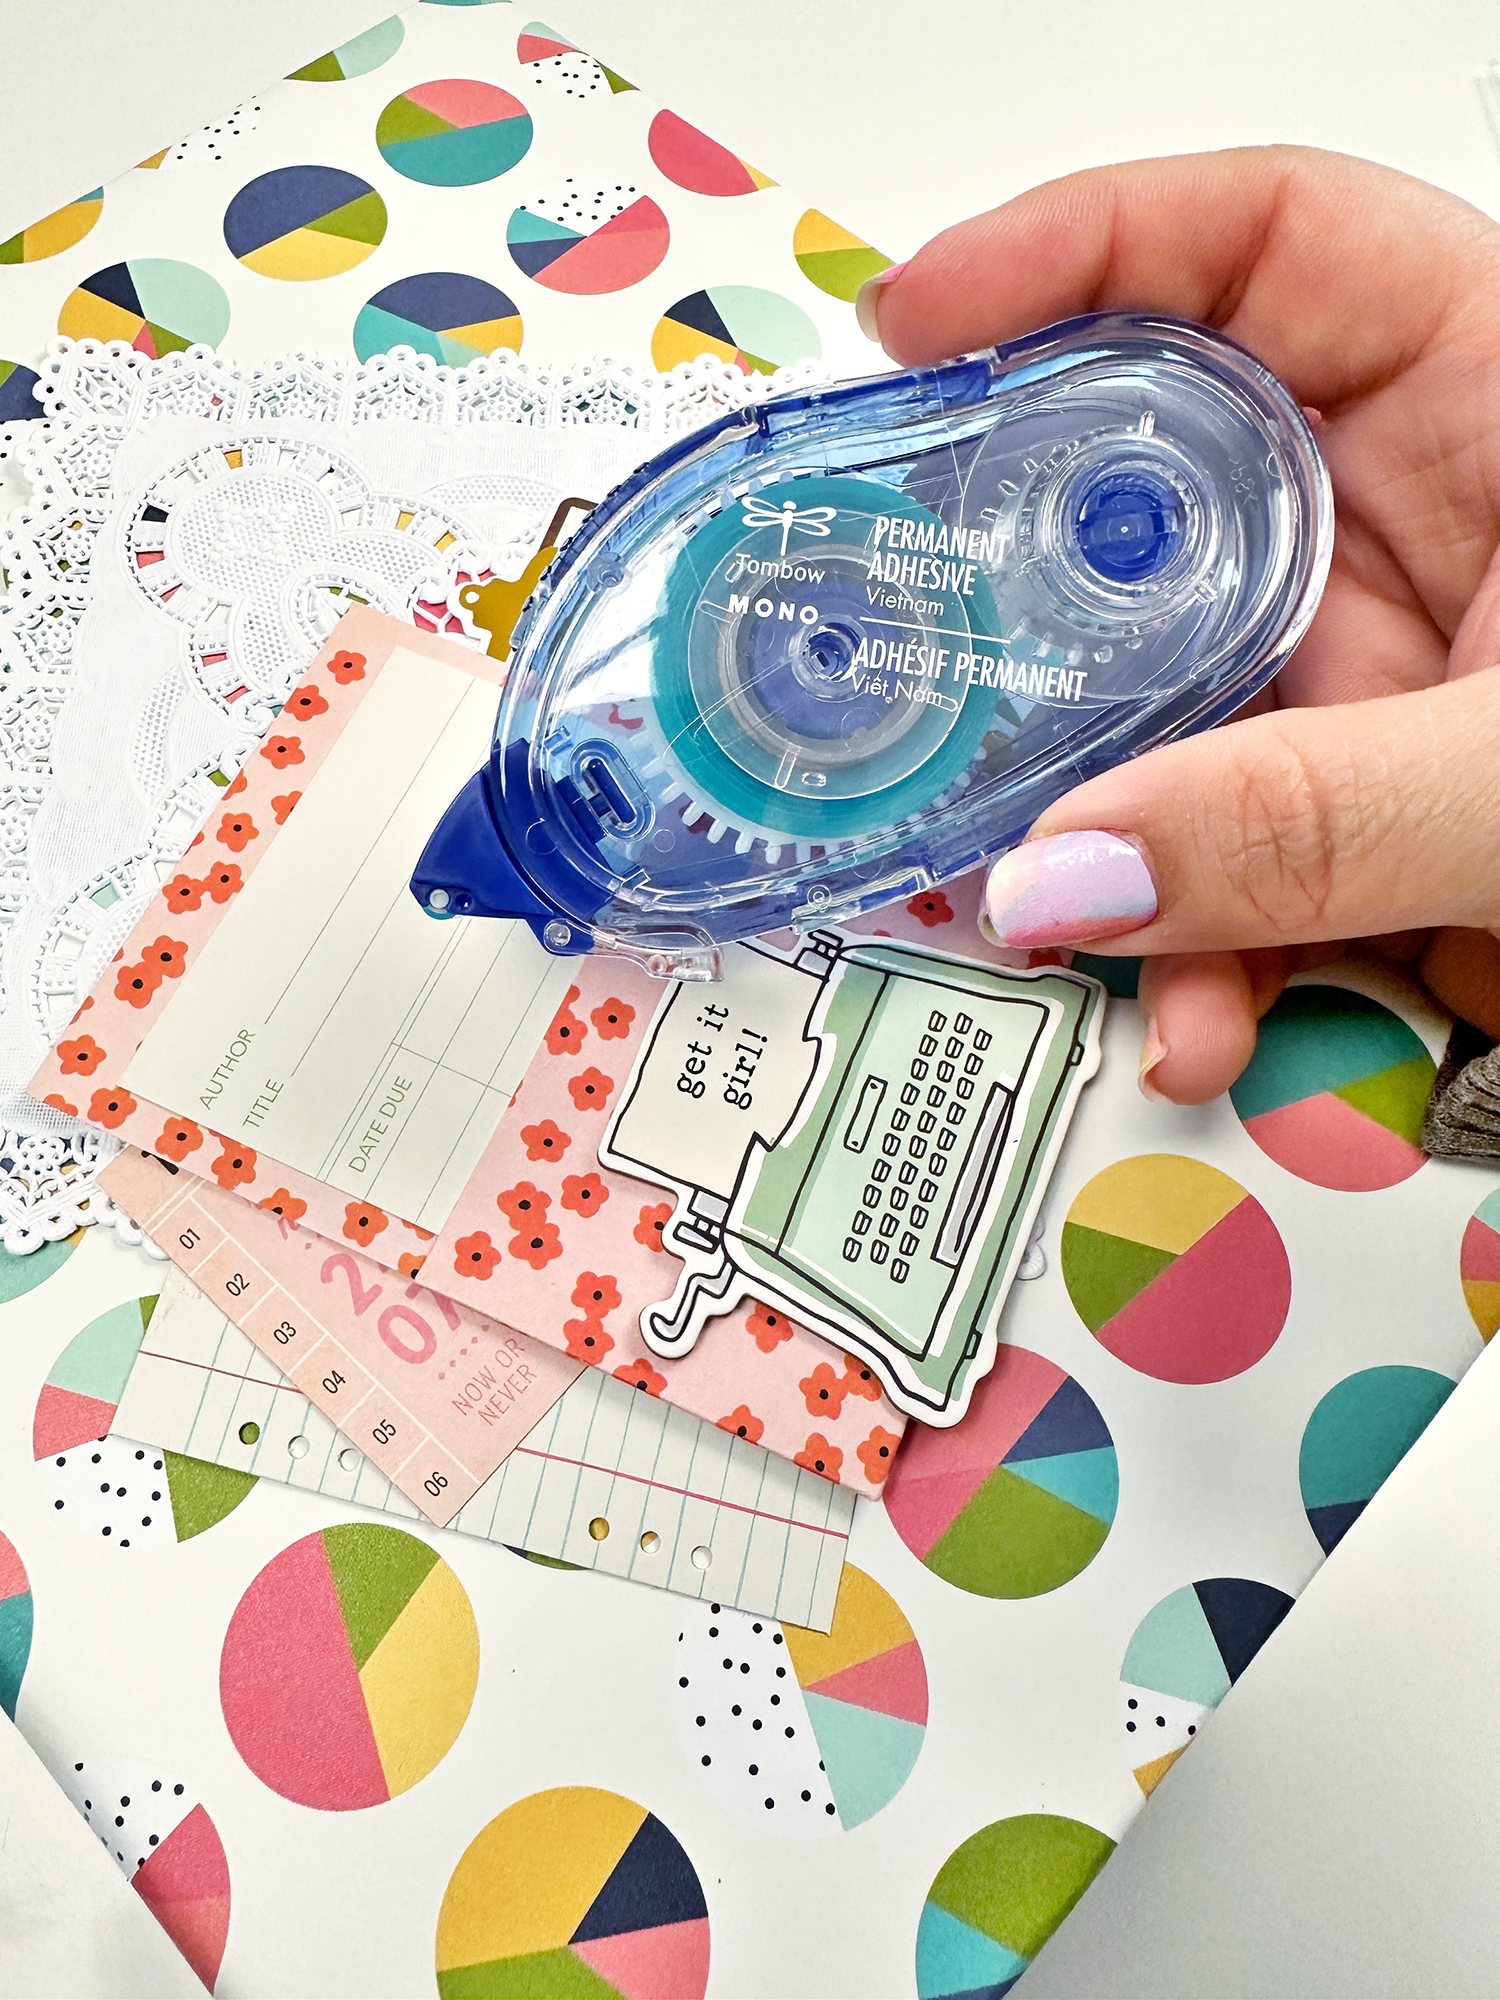 Use the Tombow MONO Adhesive Permanent to glue embellishments on the book cover. Layer embellishments of different textures and sizes to create an interesting cluster! #tombow #diy